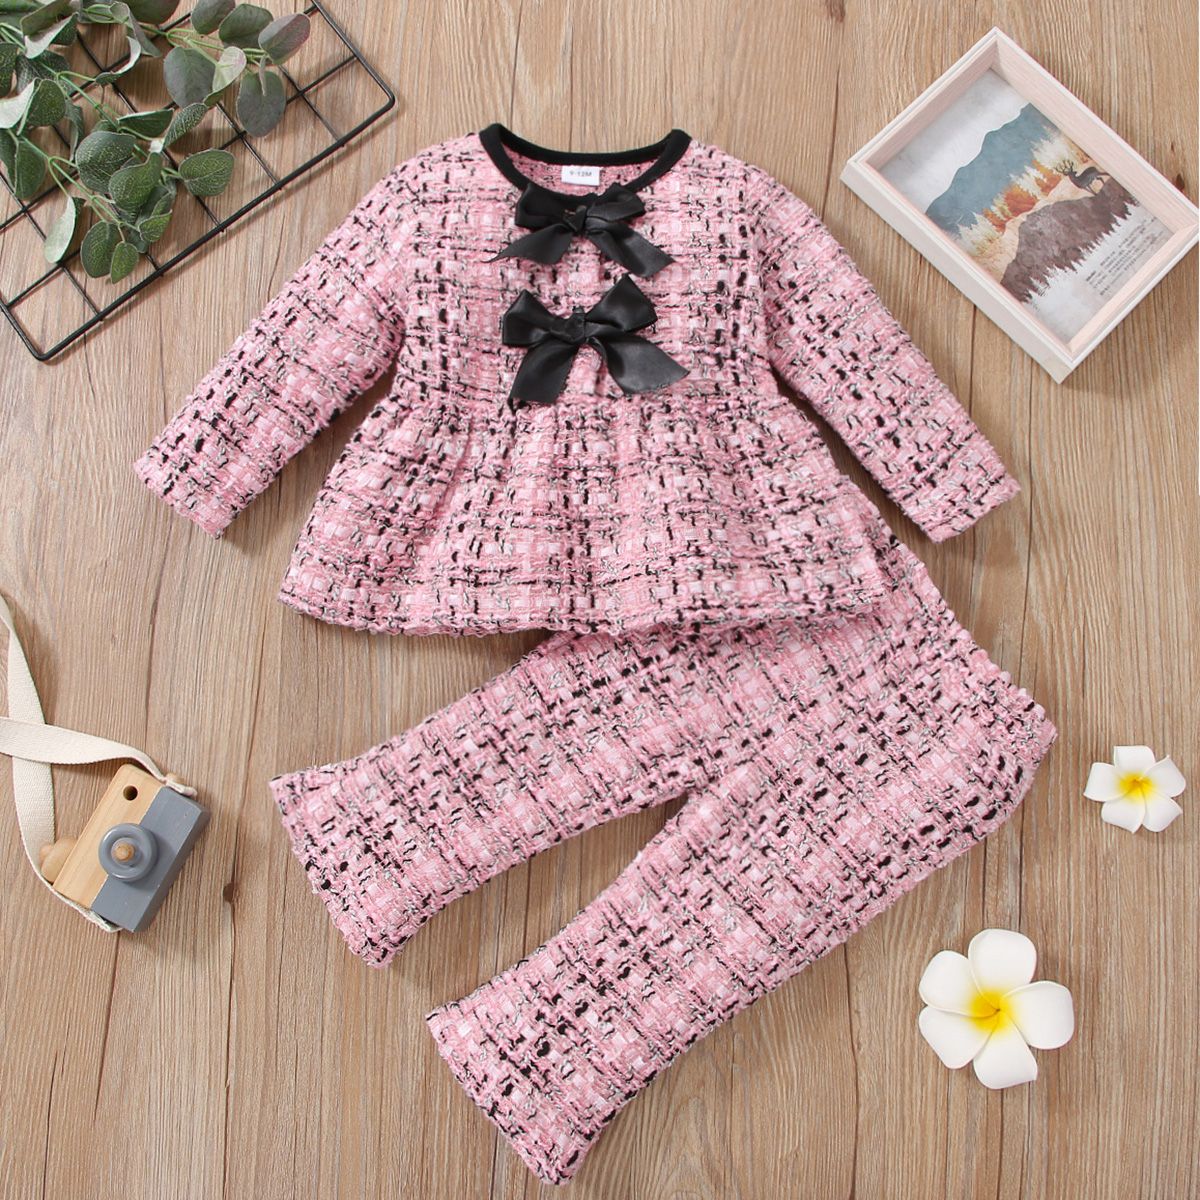 2pcs Baby Pink Tweed Plaid Long-sleeve Bowknot Top and Trousers Set